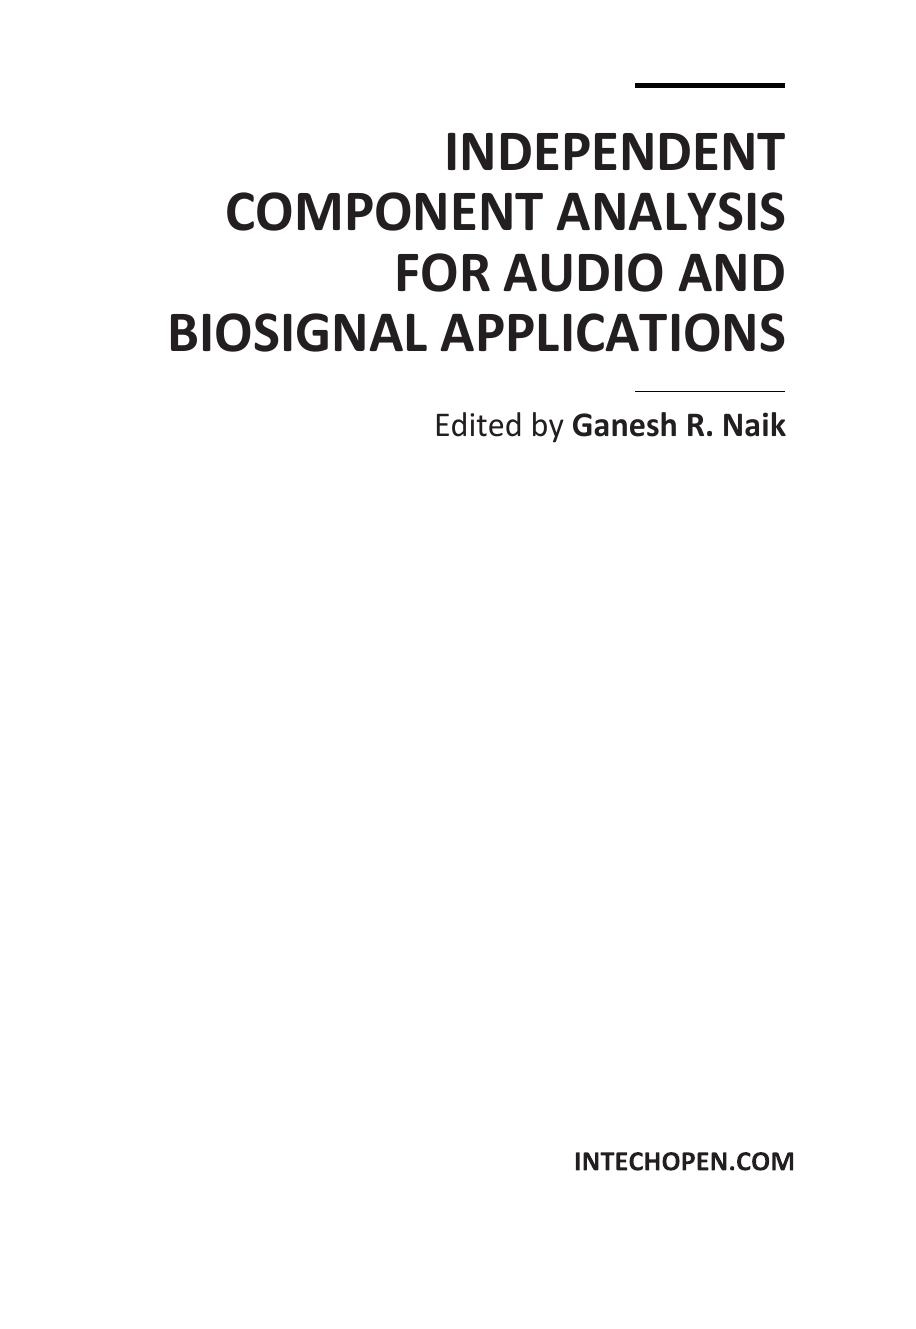 Independent Component Analysis for Audio and Biosignal Applications 2012.pdf